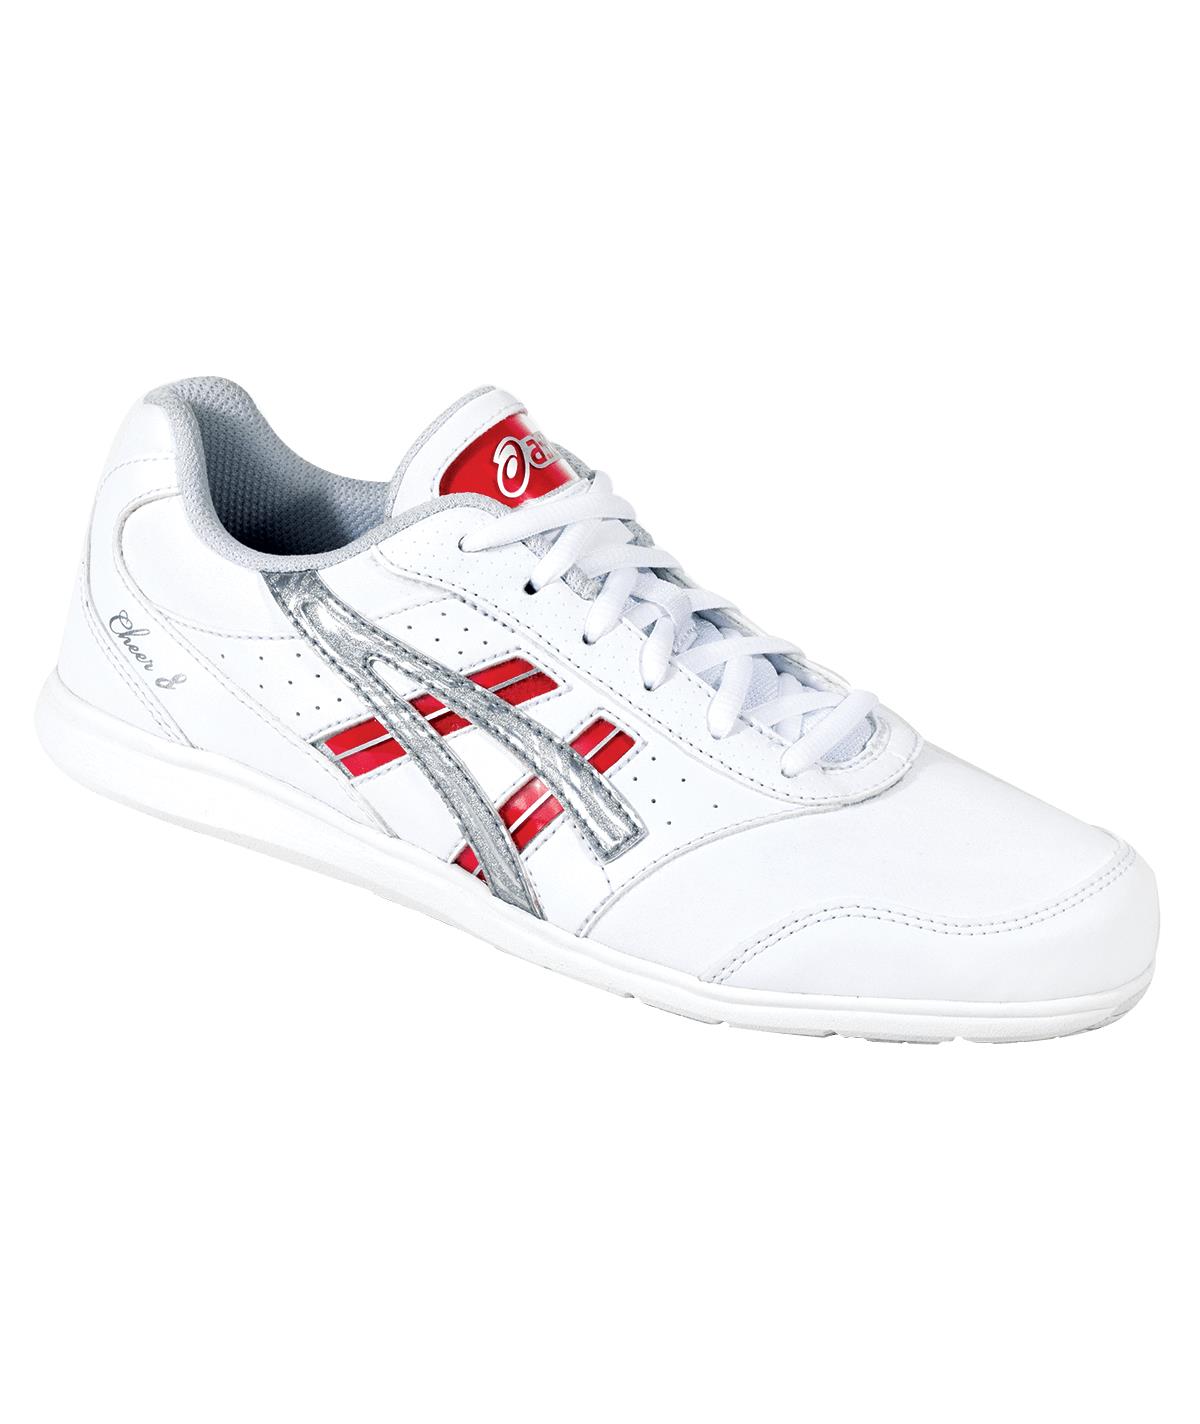 white asics cheerleading shoes, Off 64%, 